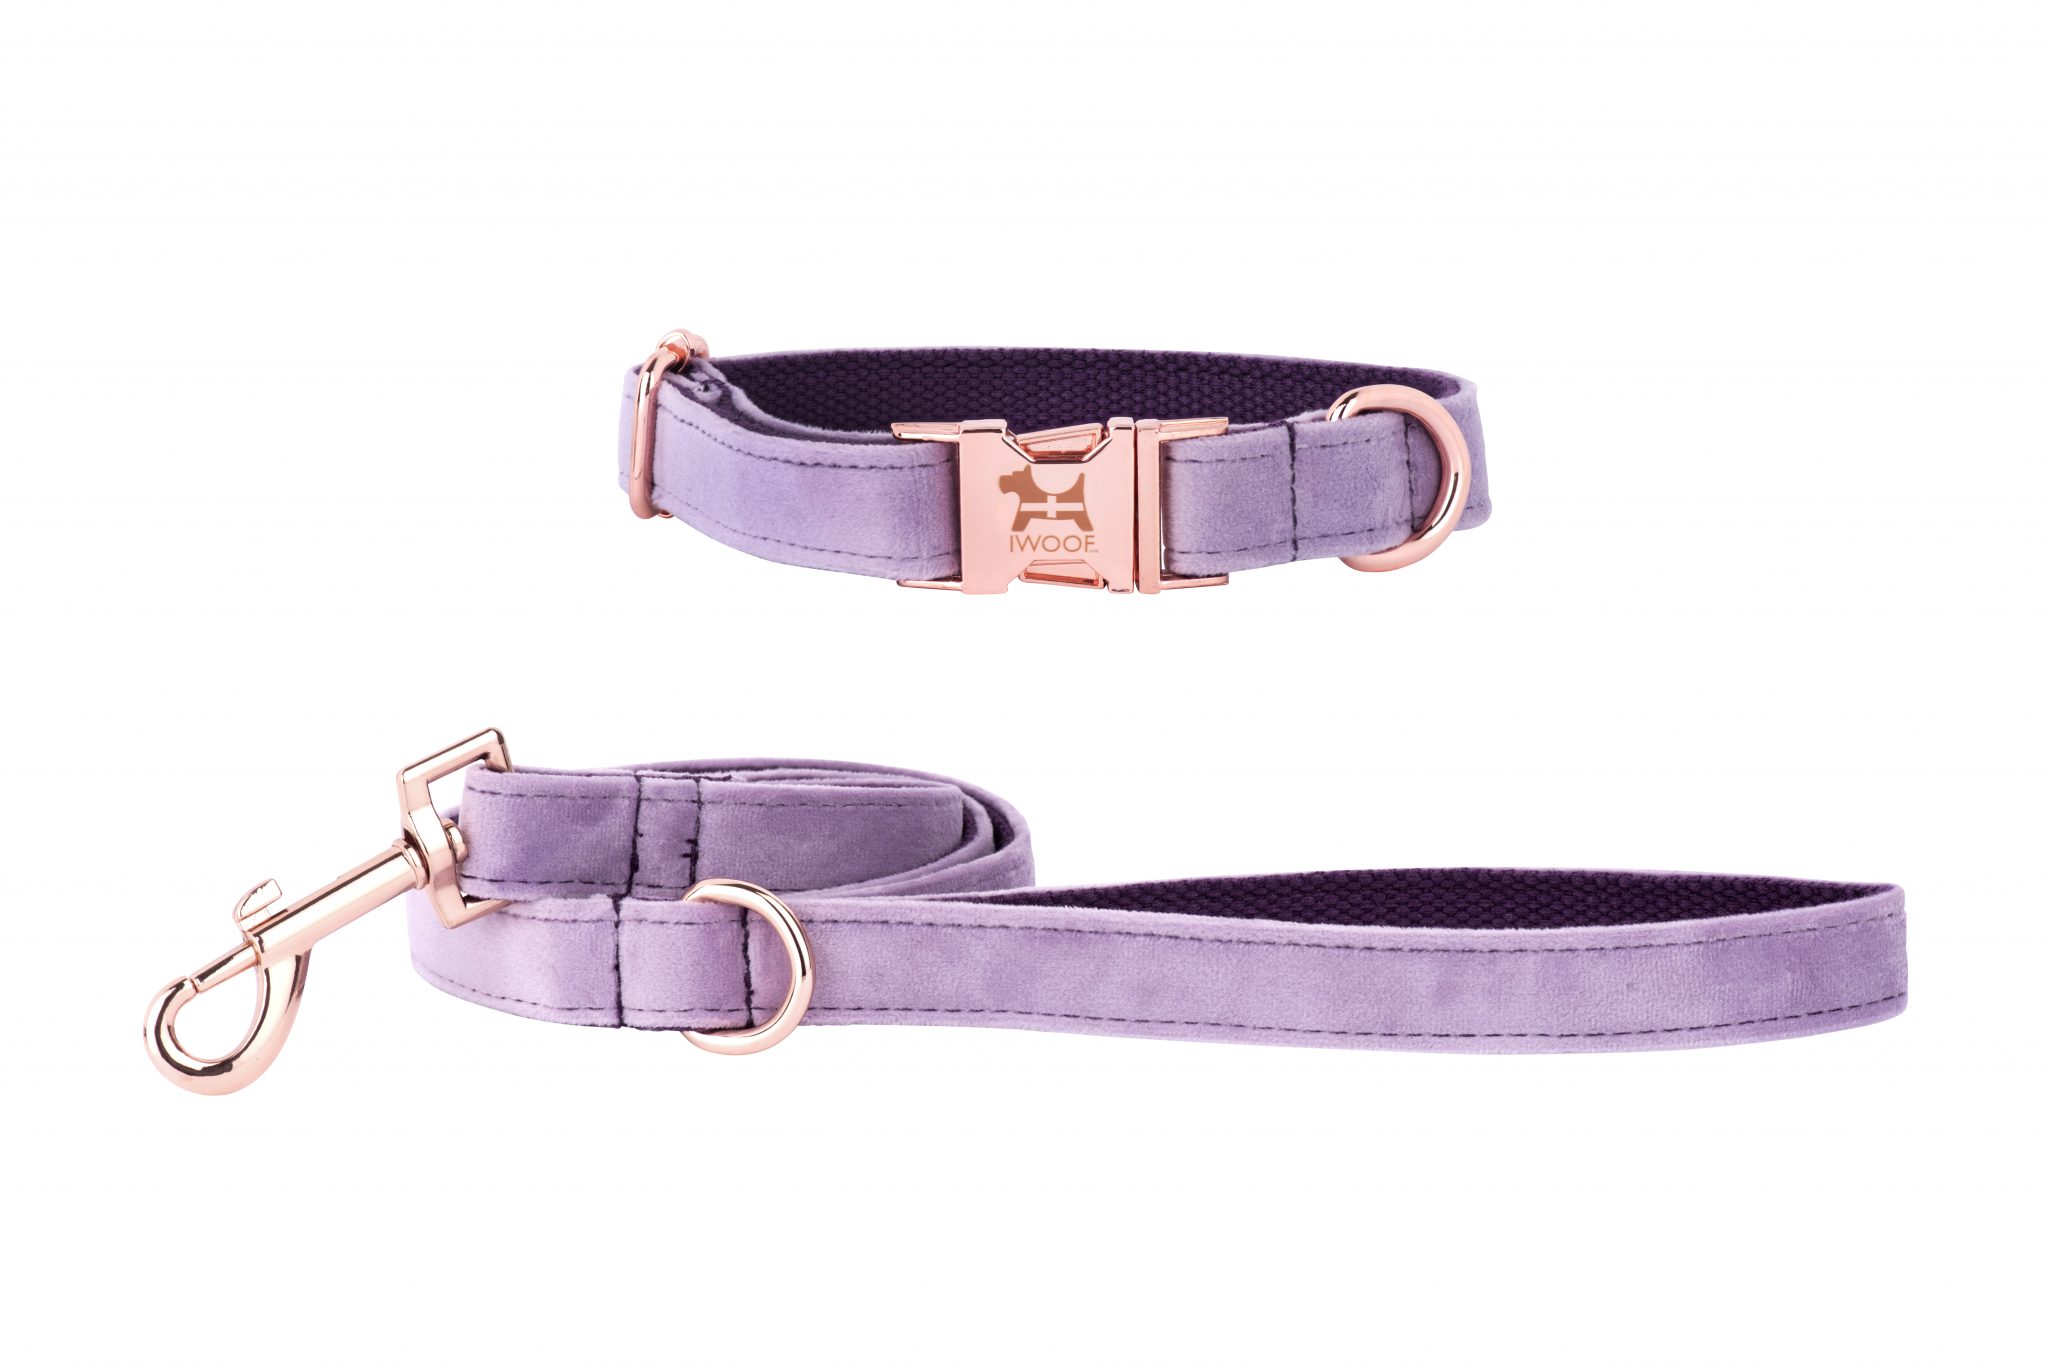 Lavender Cornish designer dog collar and lead hand made by IWOOF